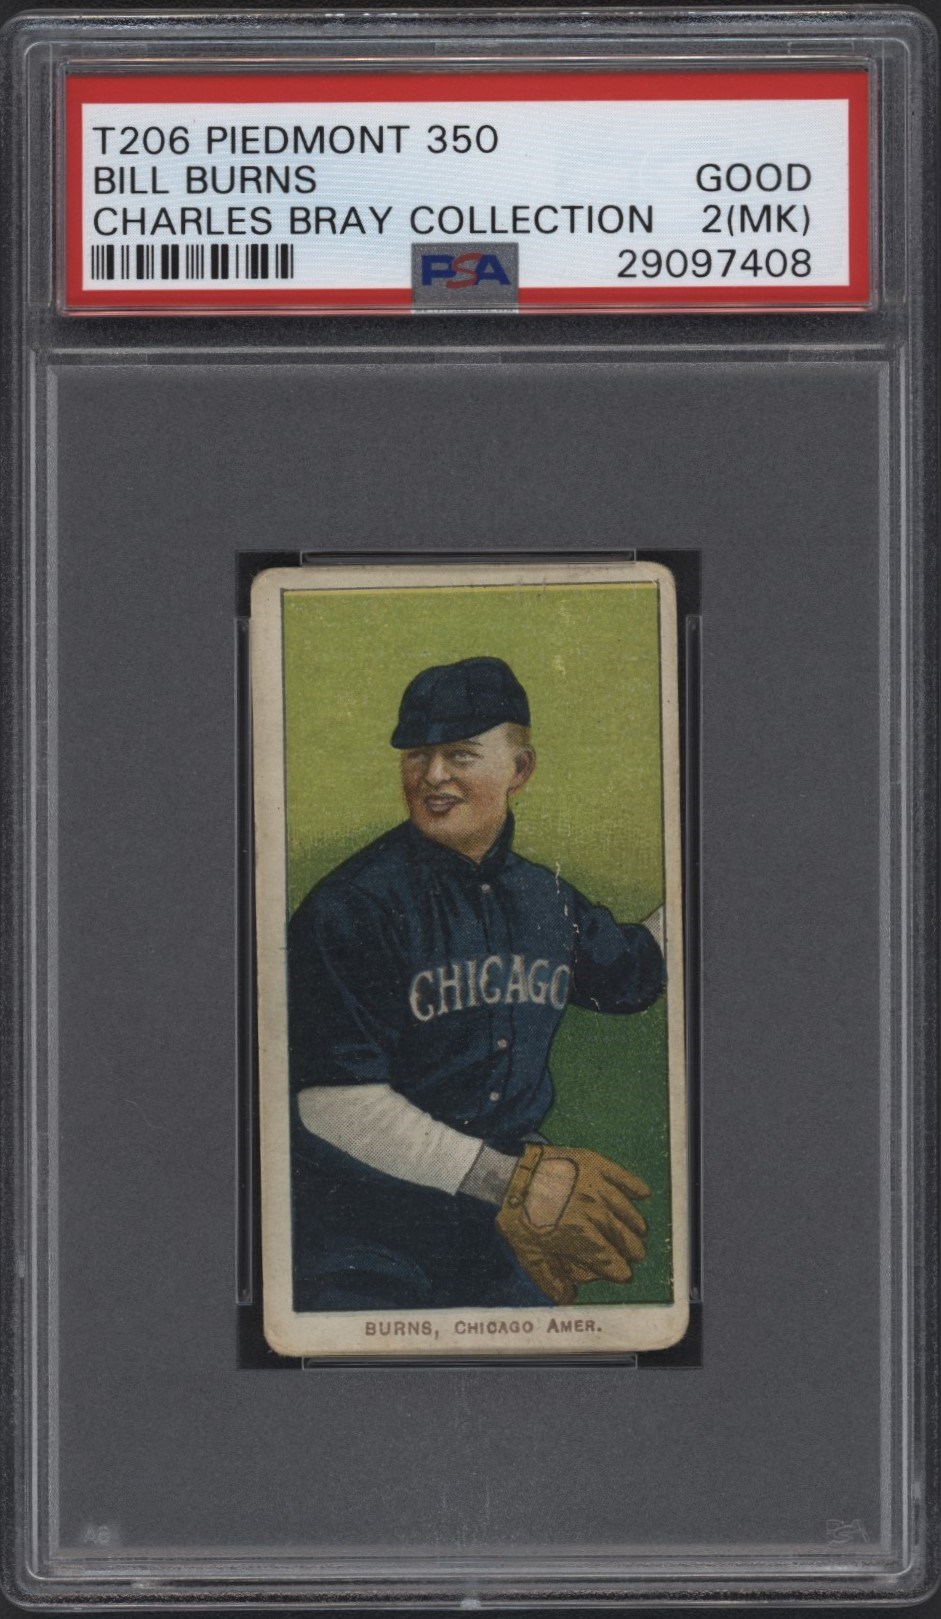 - T206 Piedmont 350 Bill Burns PSA 2 From the Charles Bray Collection